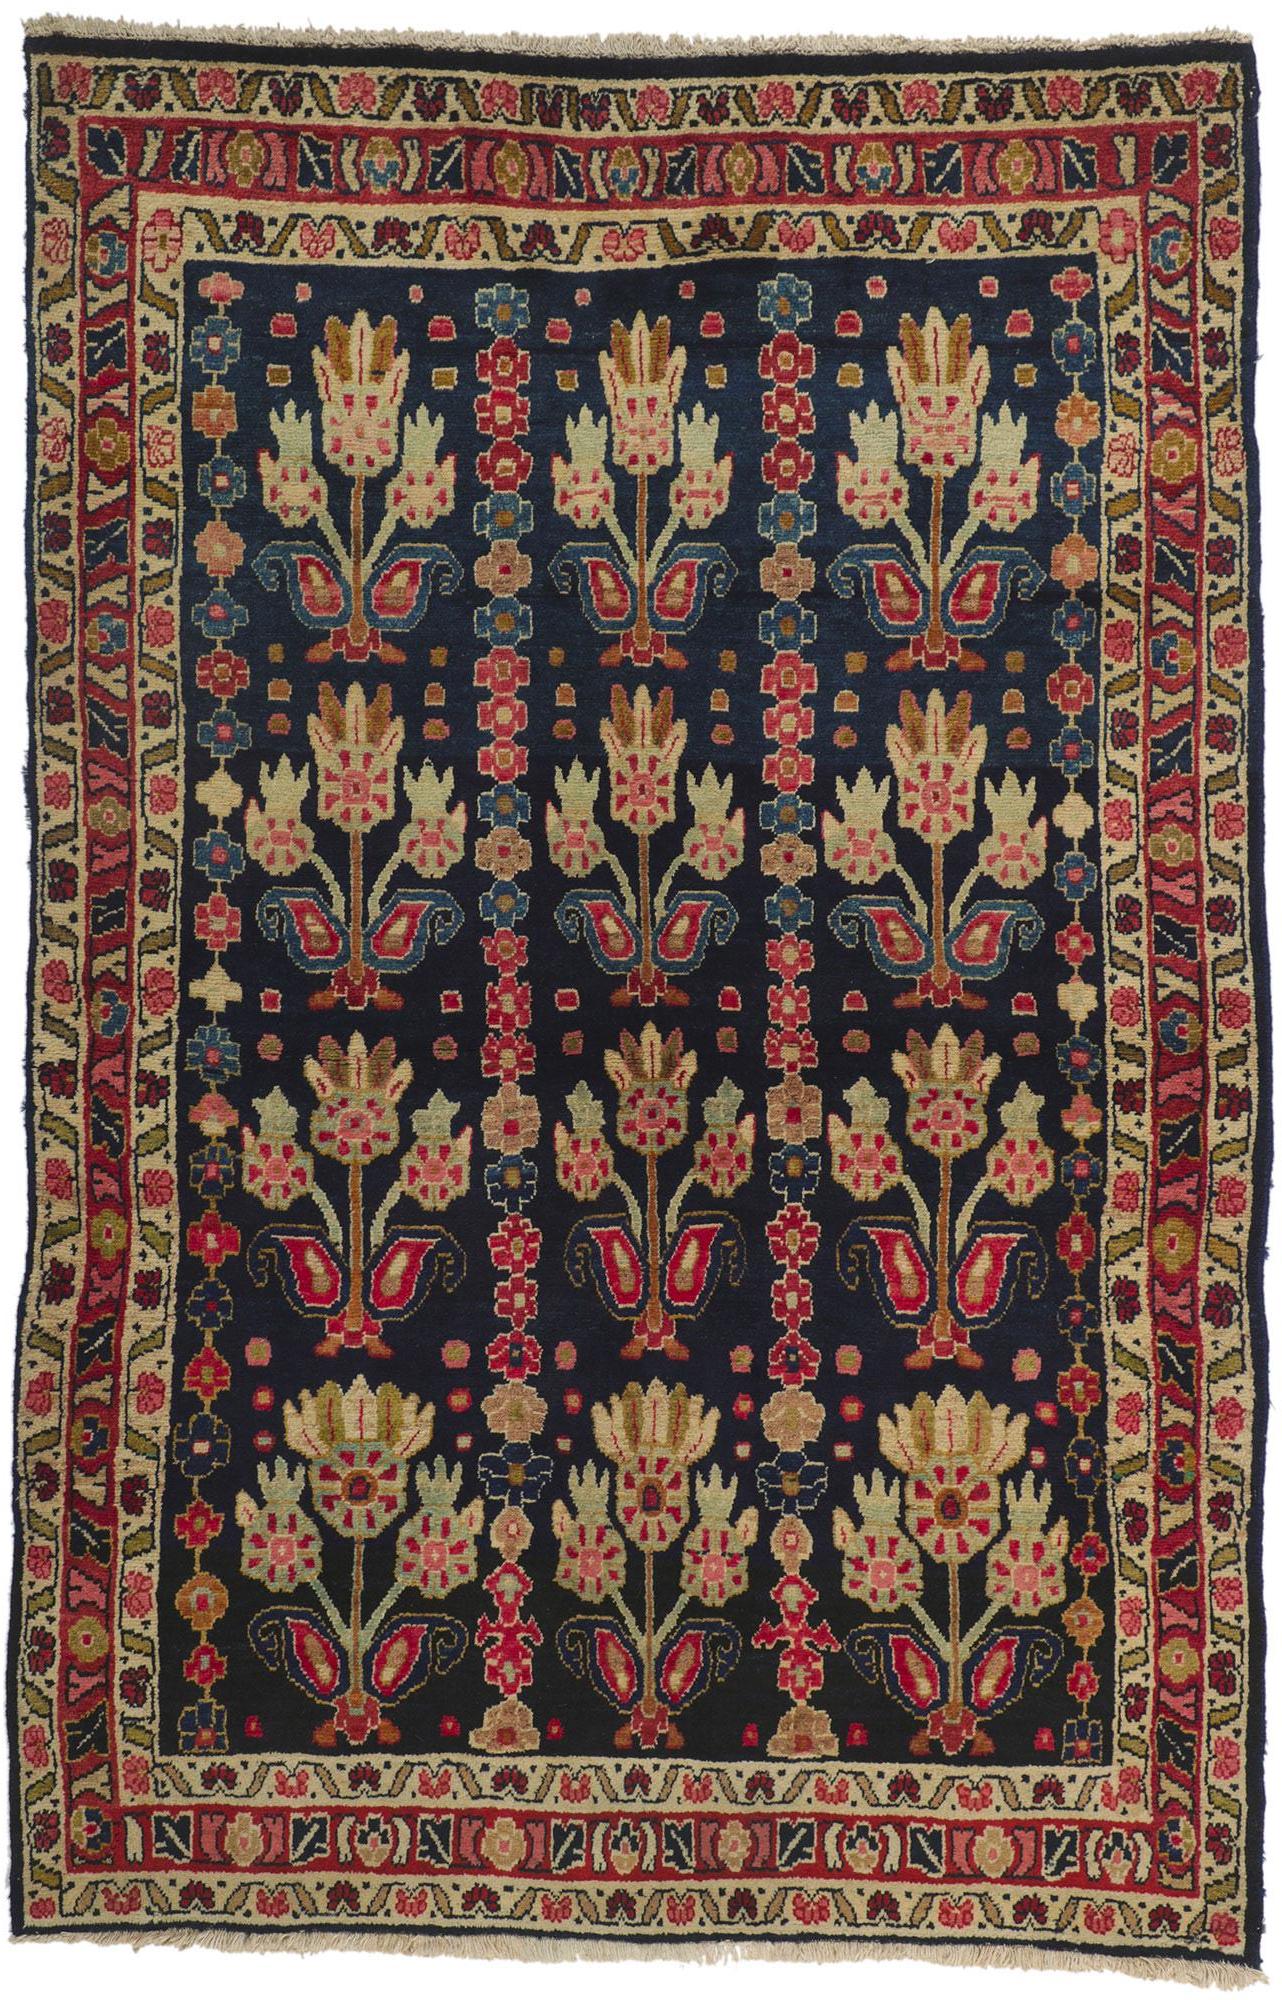 Antique Persian Mahal Rug, Timeless Elegance Meets Cultivated Beauty 2